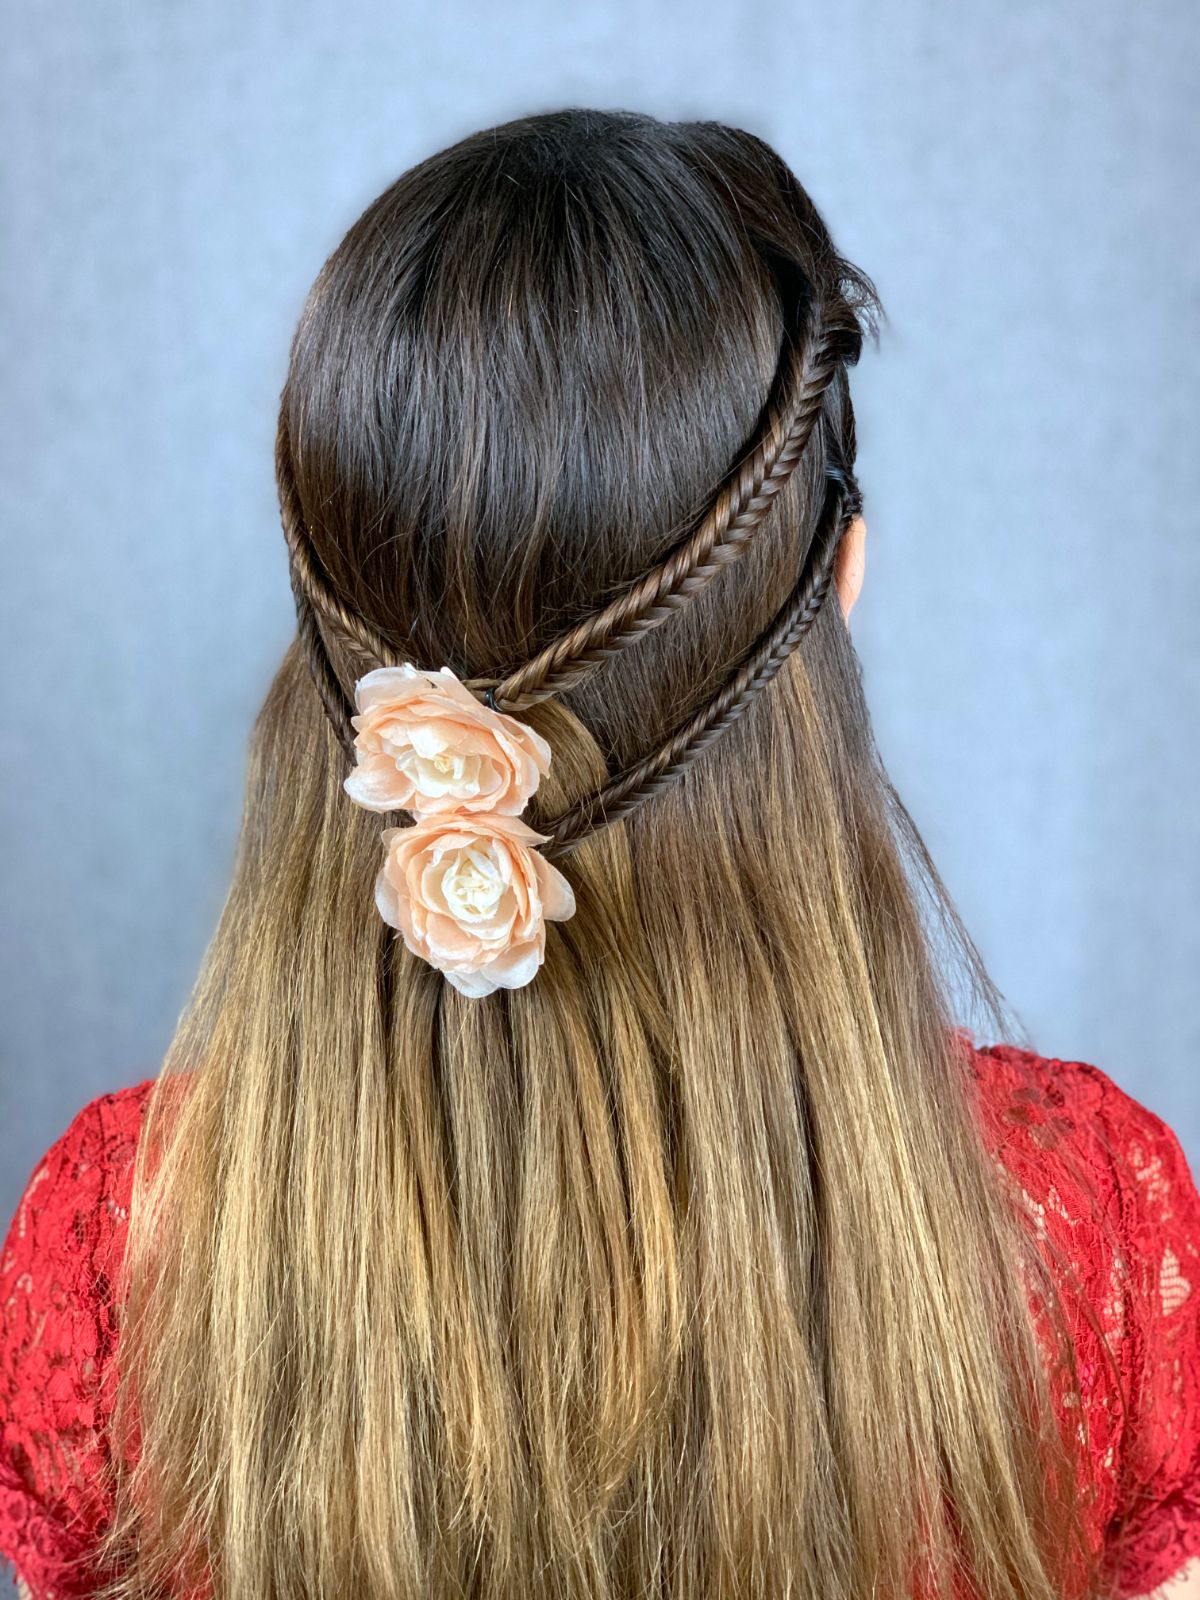 fishtail braids on side of hair with flower clip holding together in the back